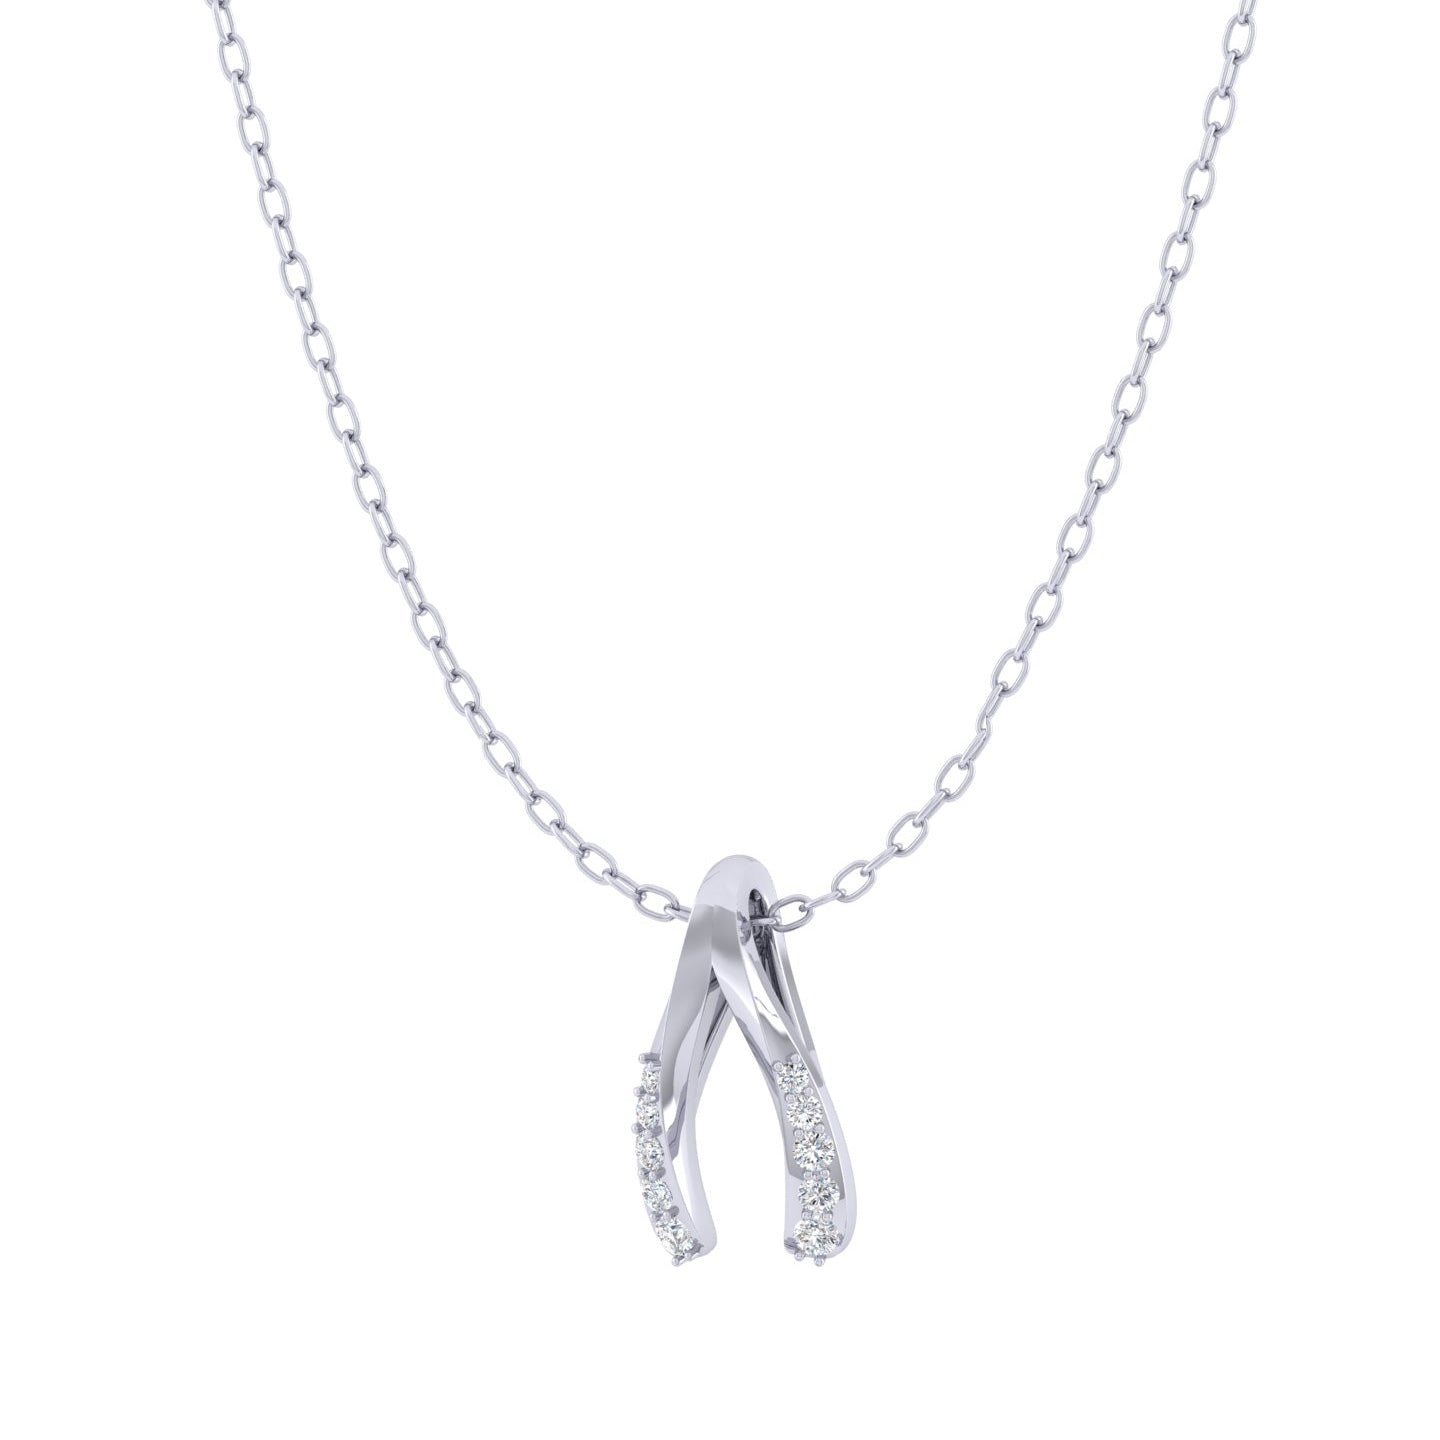 Lucky Wishbone 1/20 Cttw Natural Diamond Pendant Necklace set in 925 Sterling Silver